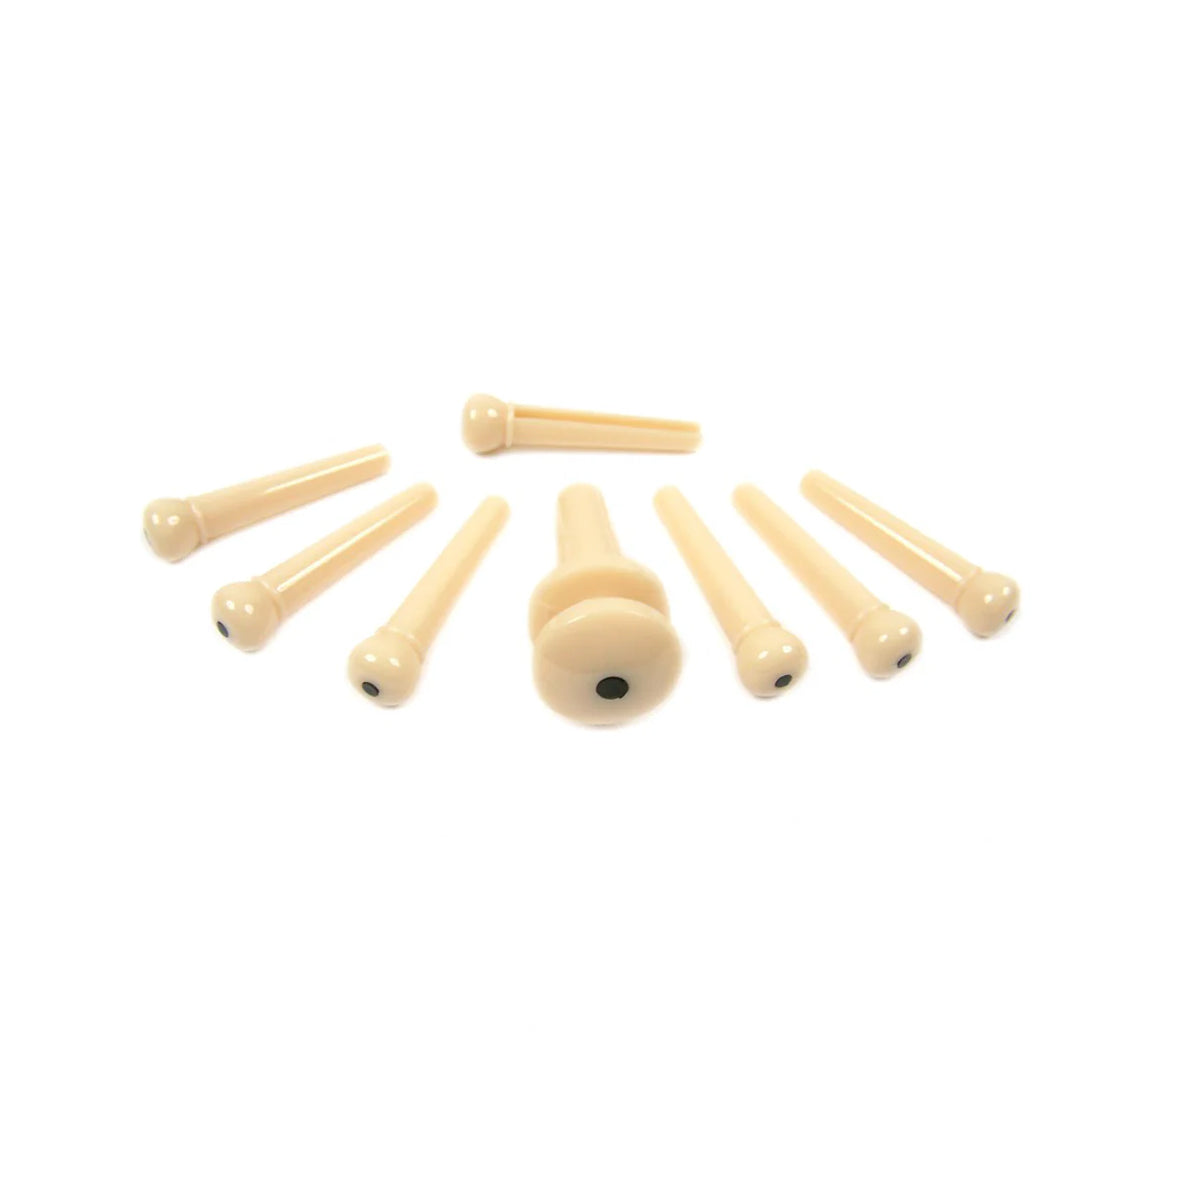 Planetwaves PWPS12 7 Plastic Bridge + 1 Plastic End Pin - Ivory with Black Dot